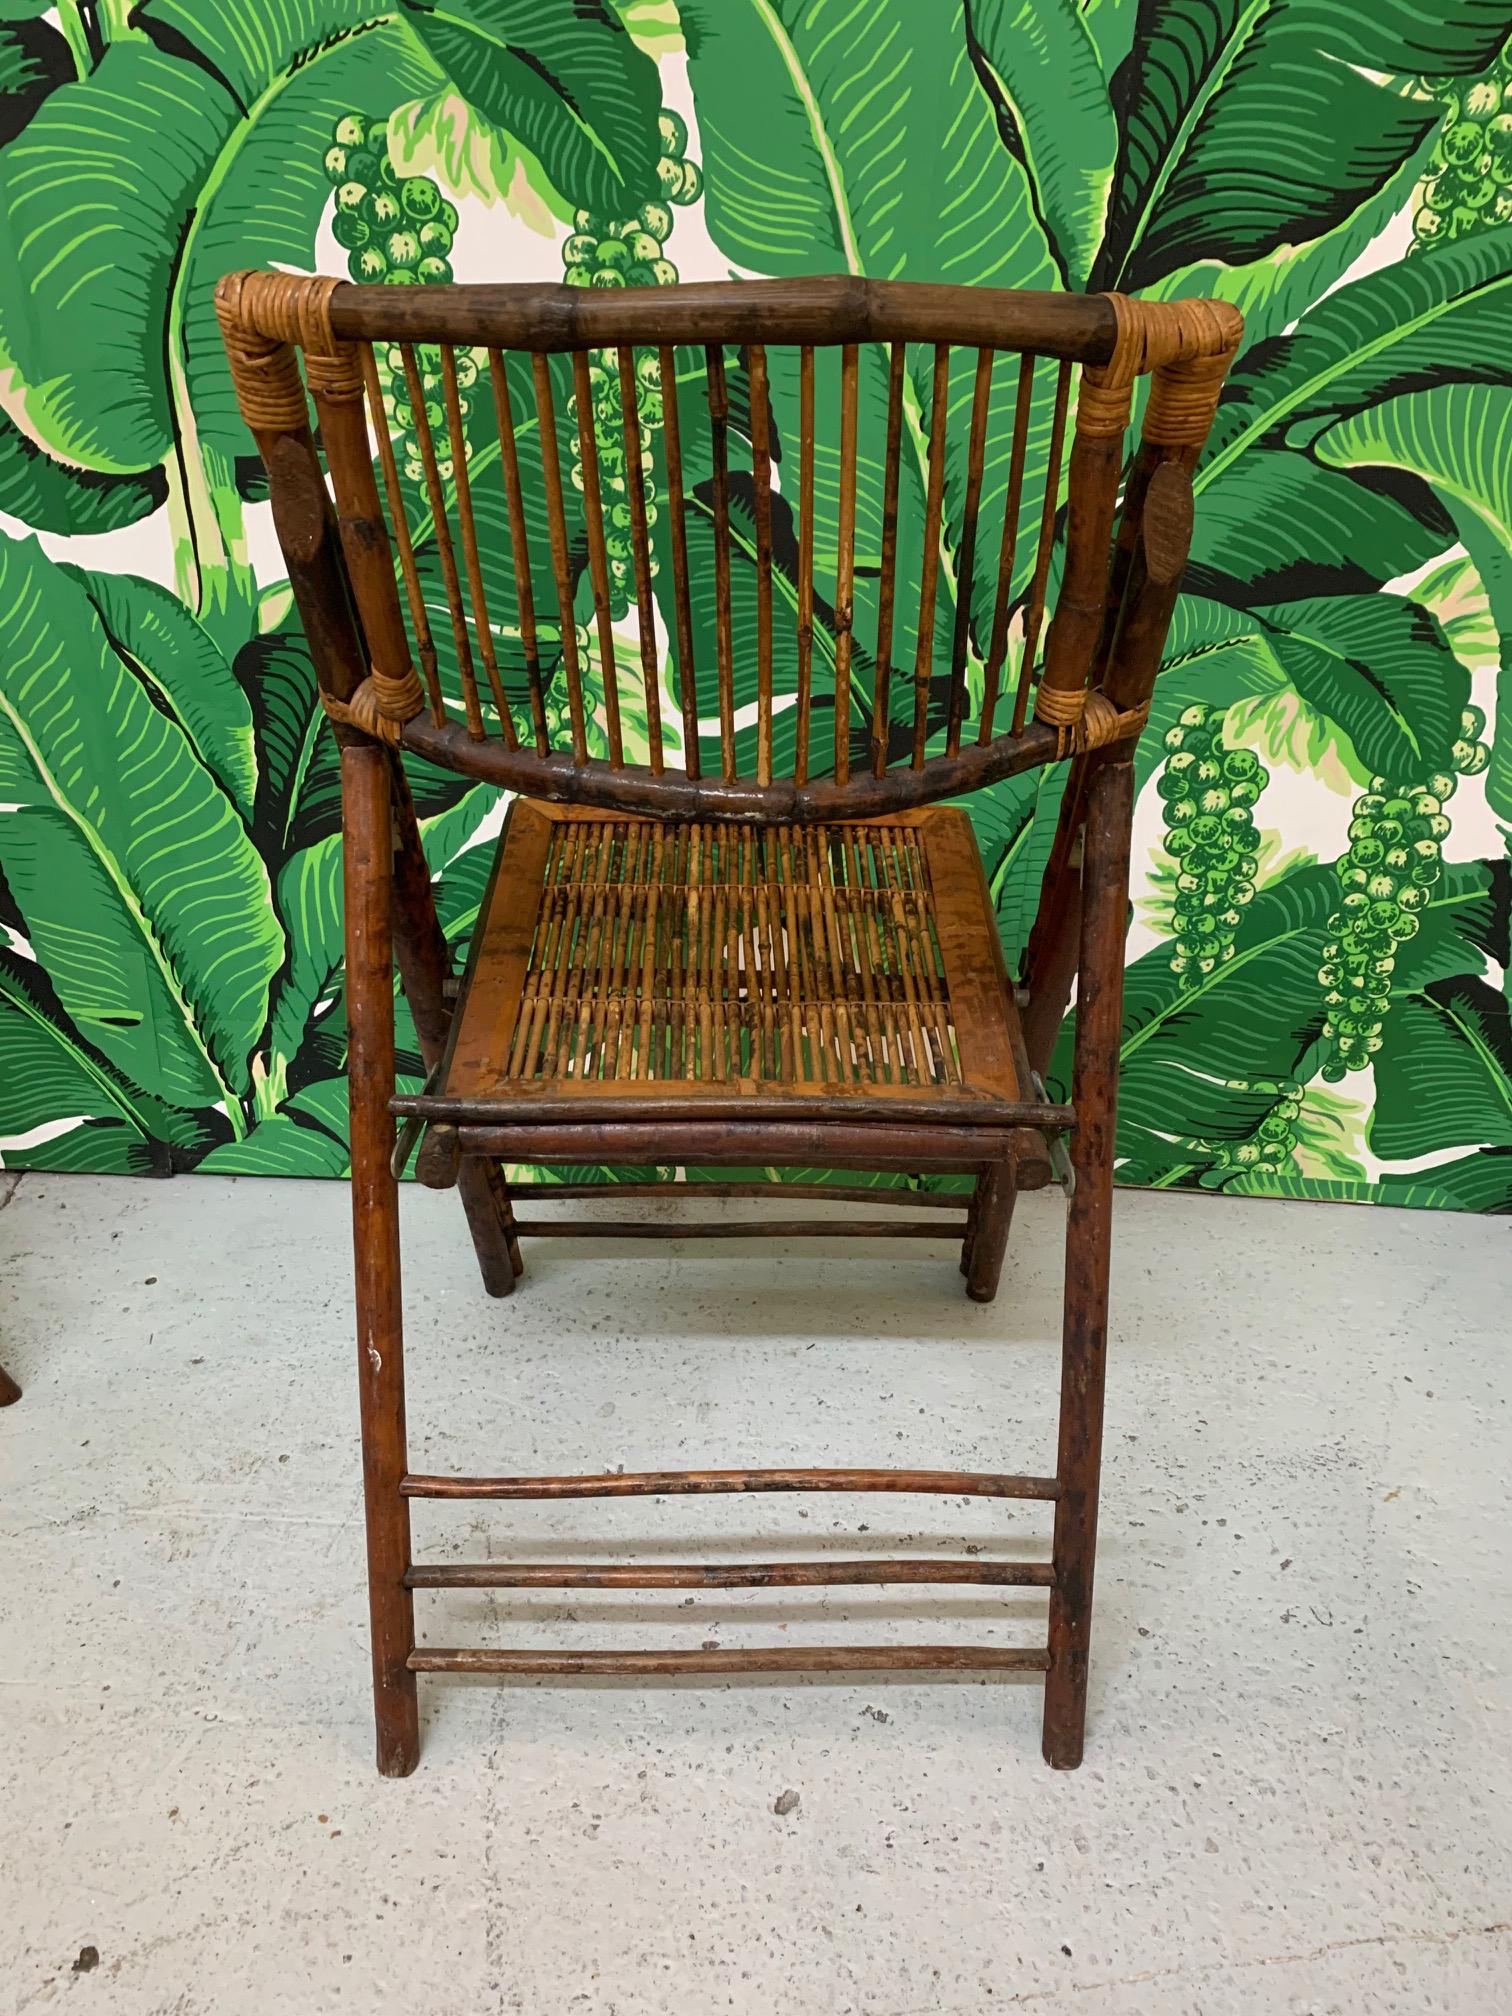 vintage bamboo folding chairs